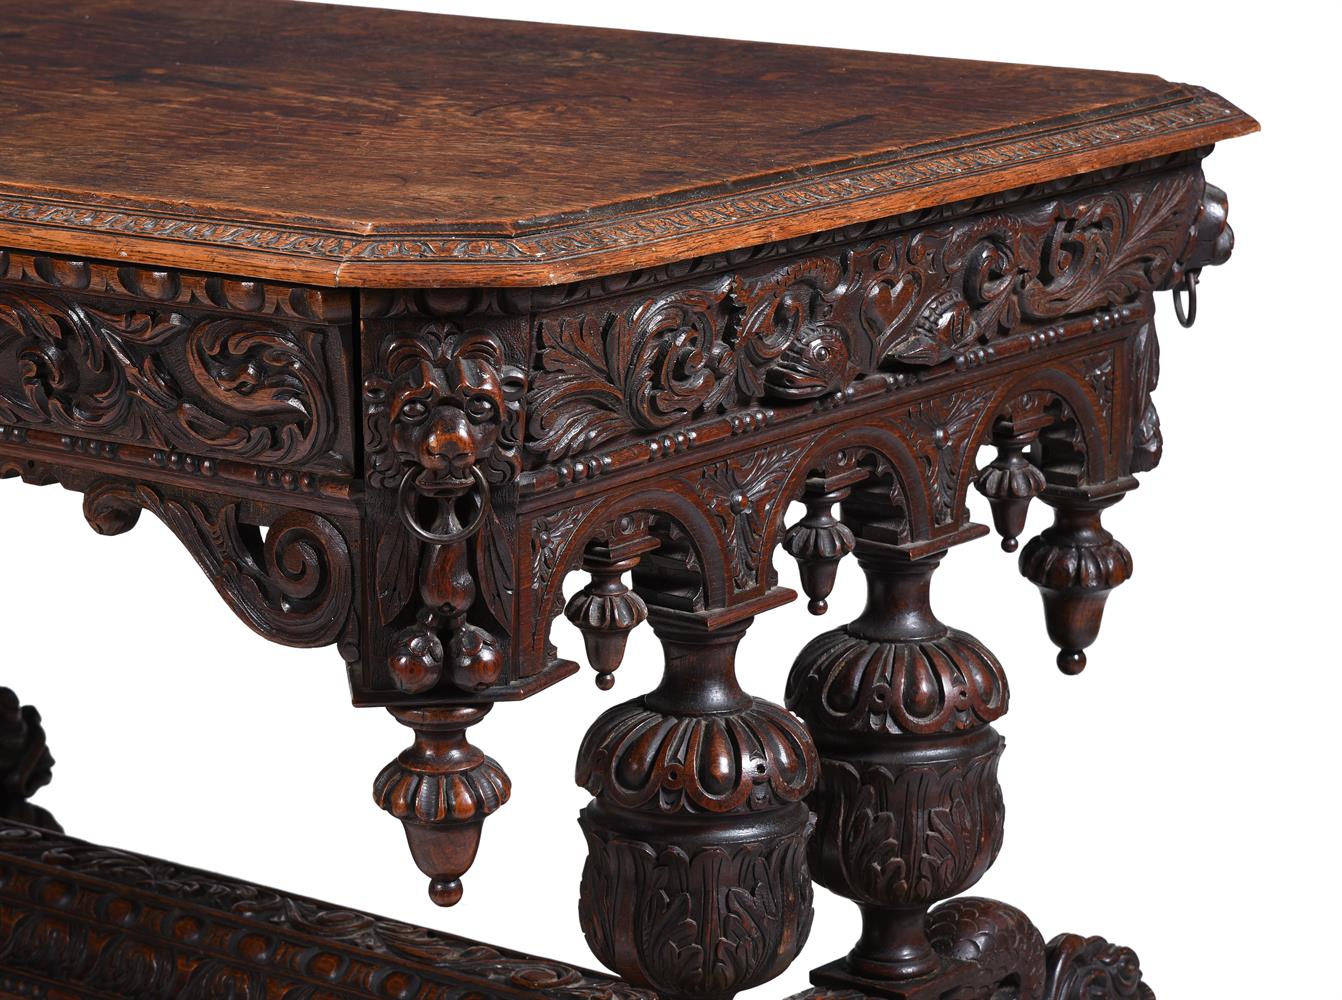 A VICTORIAN CARVED OAK CENTRE TABLE, SECOND HALF 19TH CENTURY - Image 2 of 3